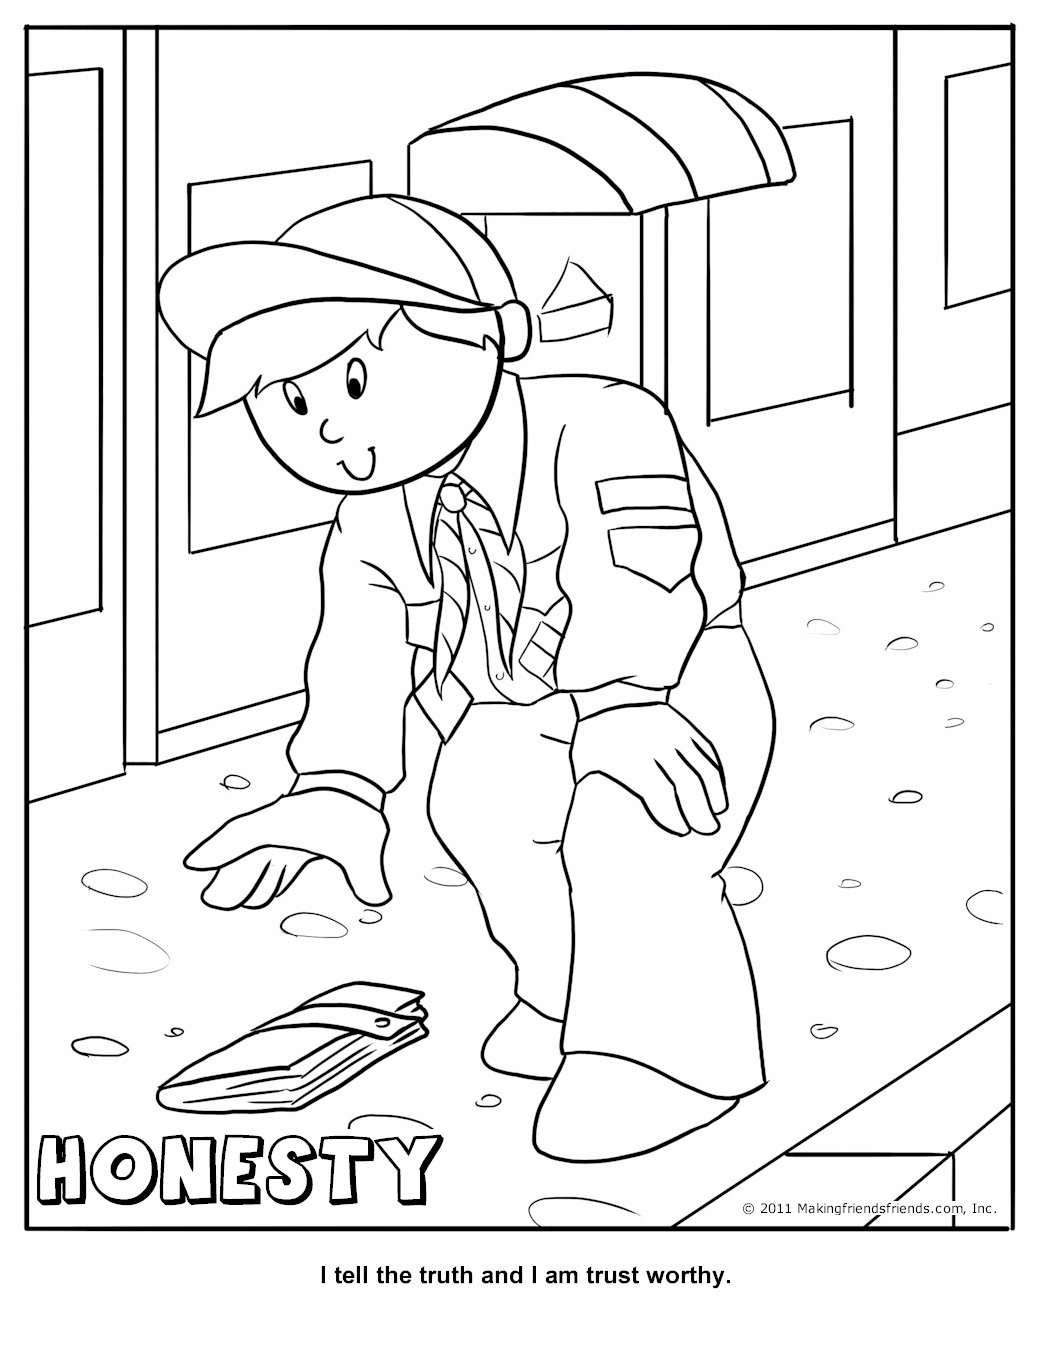 Honesty coloring pages